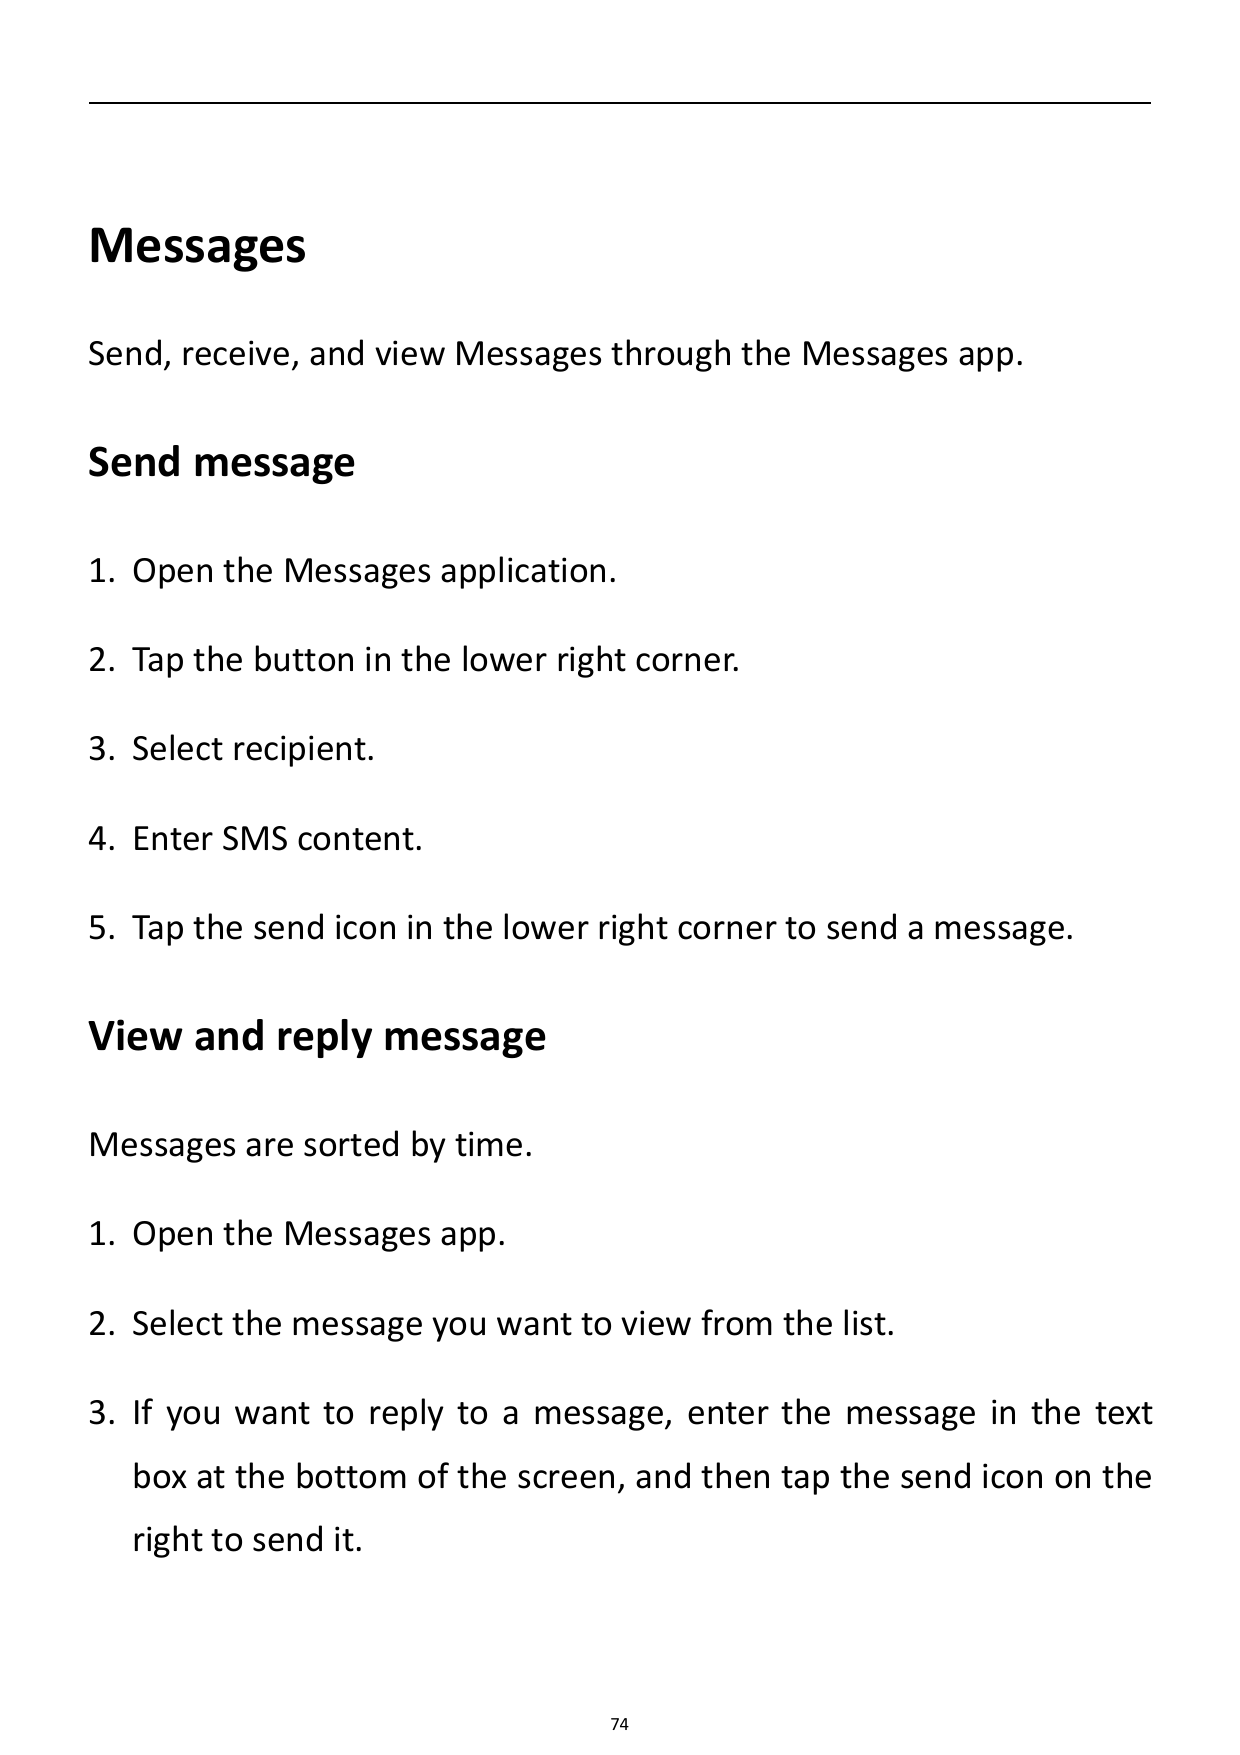 MessagesSend, receive, and view Messages through the Messages app.Send message1. Open the Messages application.2. Tap the button